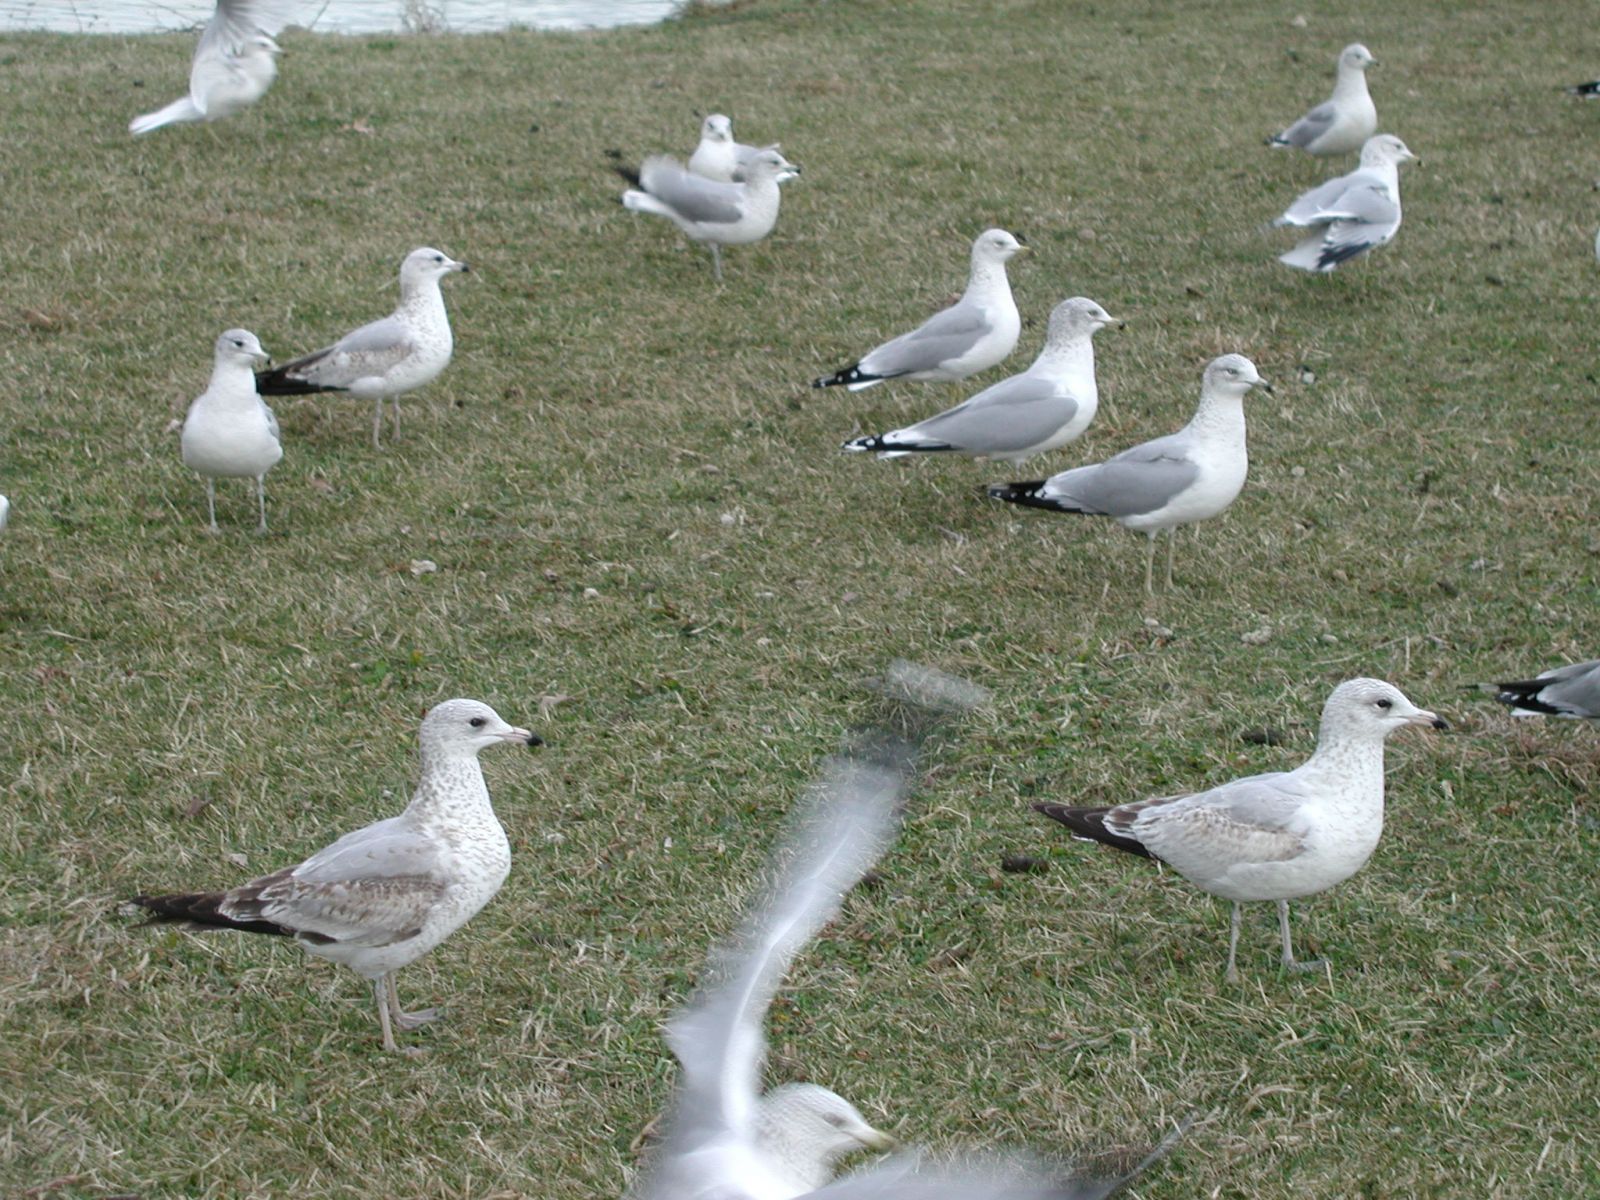 Virginia Seagull Control and Removal